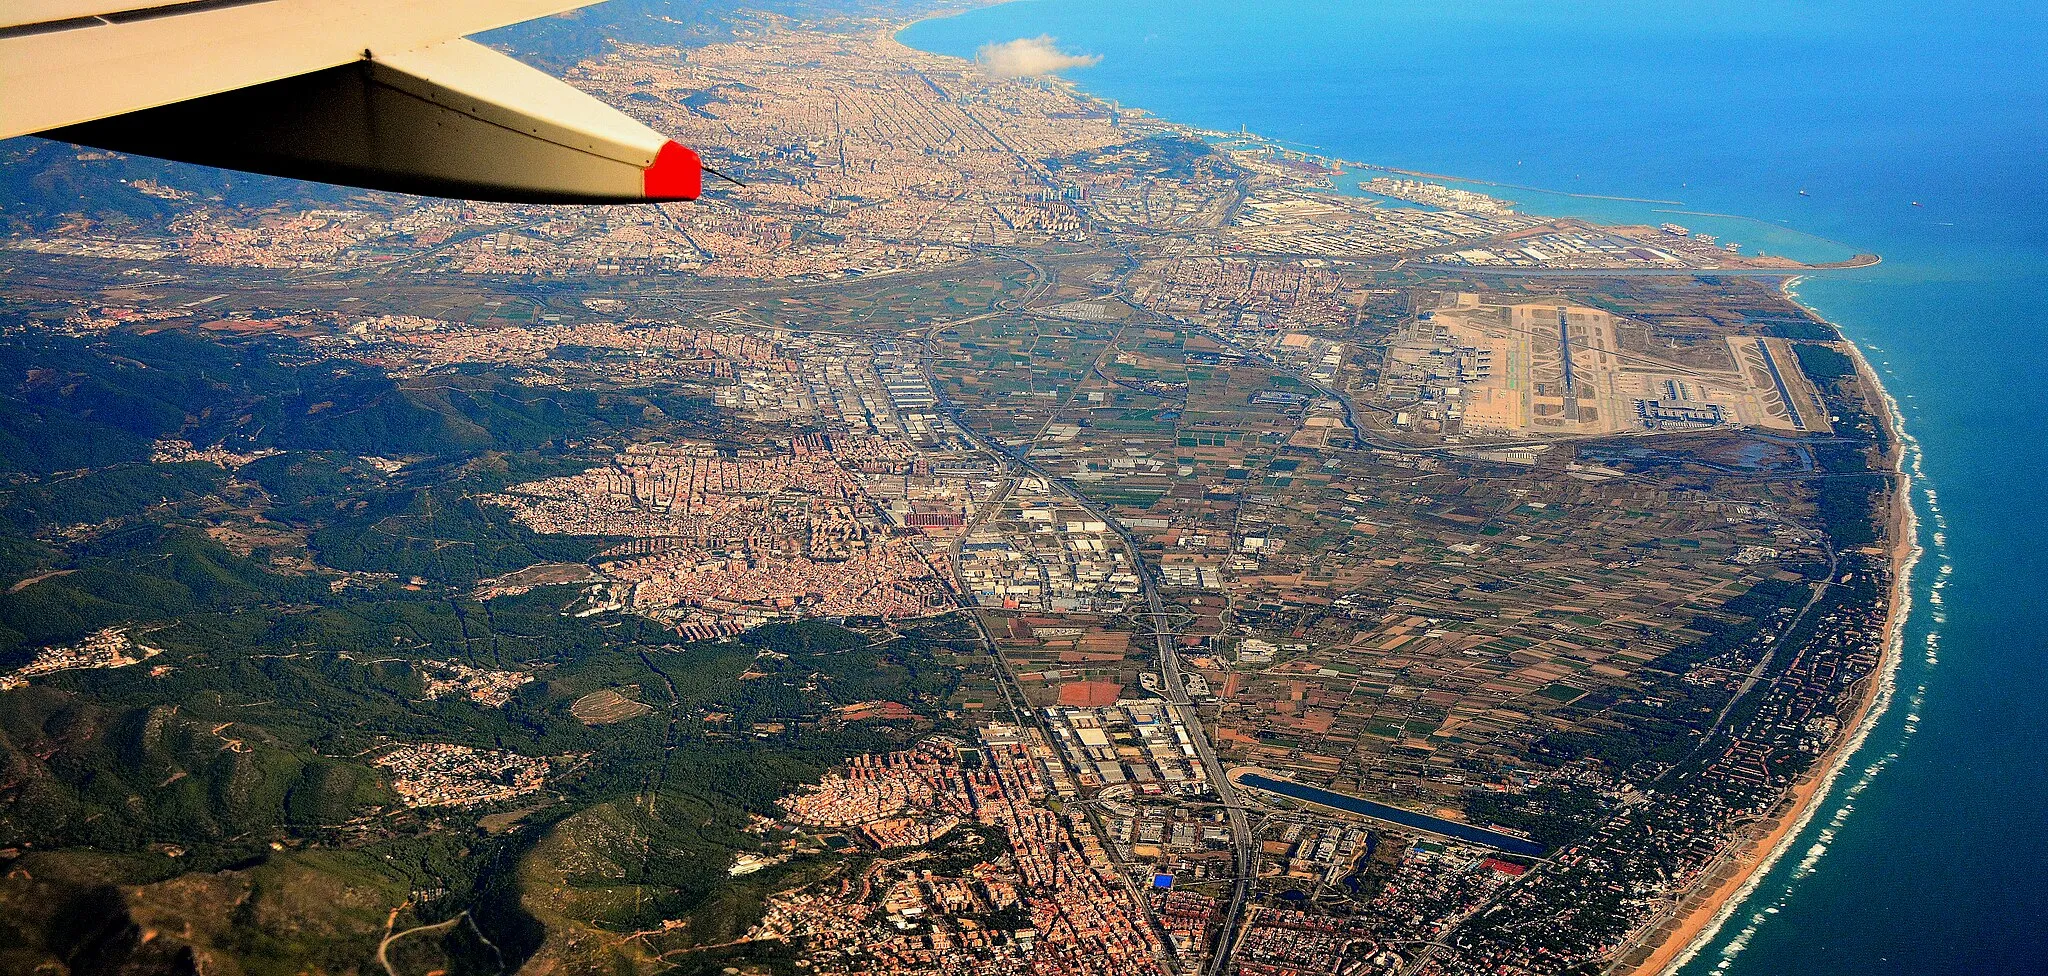 Photo showing: We are looking northeast, from a height of approx 12,000 feet (3650 metres). At top left is part of the city of Barcelona, including its port area. The darker area near the port is the historic hill of Montjuïc, which is believed to be the birthplace of the city.
Centre right is Barcelona's airport, named after the nearest town -  "El Prat". From the airport south-westwards there are many kilometres/miles of popular beaches. Behind the beaches are trees, with houses in between (except near the airport, where there are nature reserves.)

Clearly seen at the bottom of the picture is a long narrow waterway, close to the town of Castelldefels, which was constructed for the 1992 Olympics as a venue for canoe sprint events.